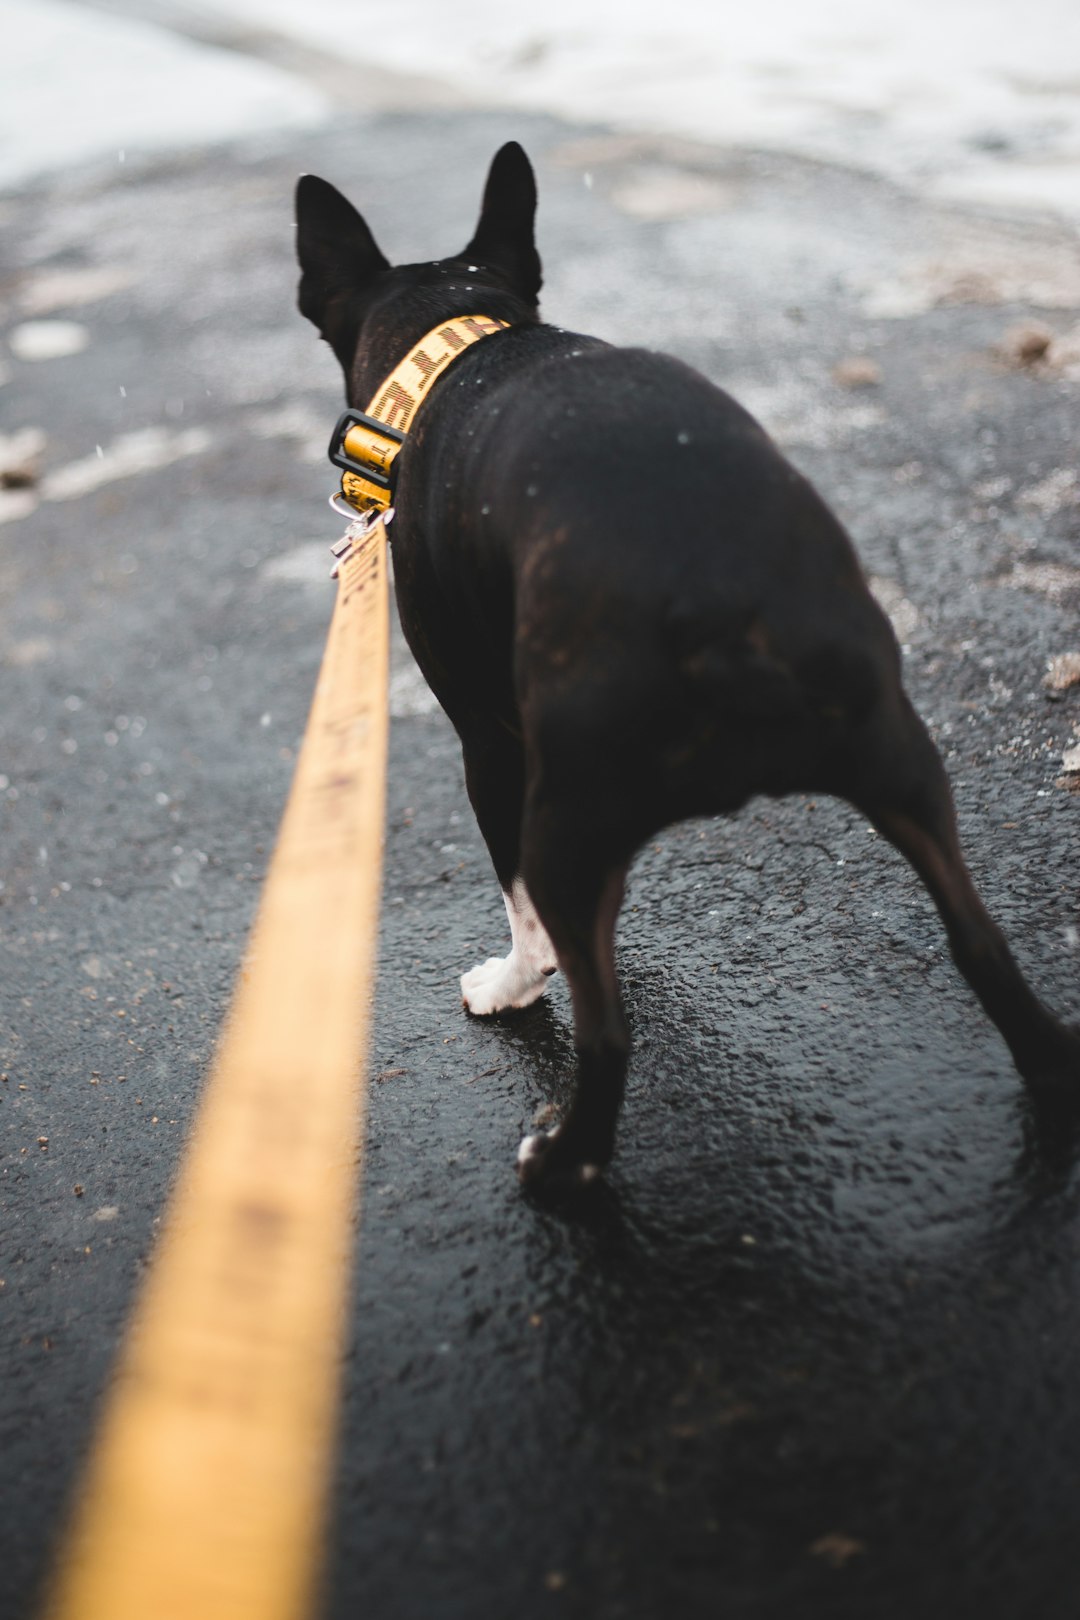 leashed dog standing on road